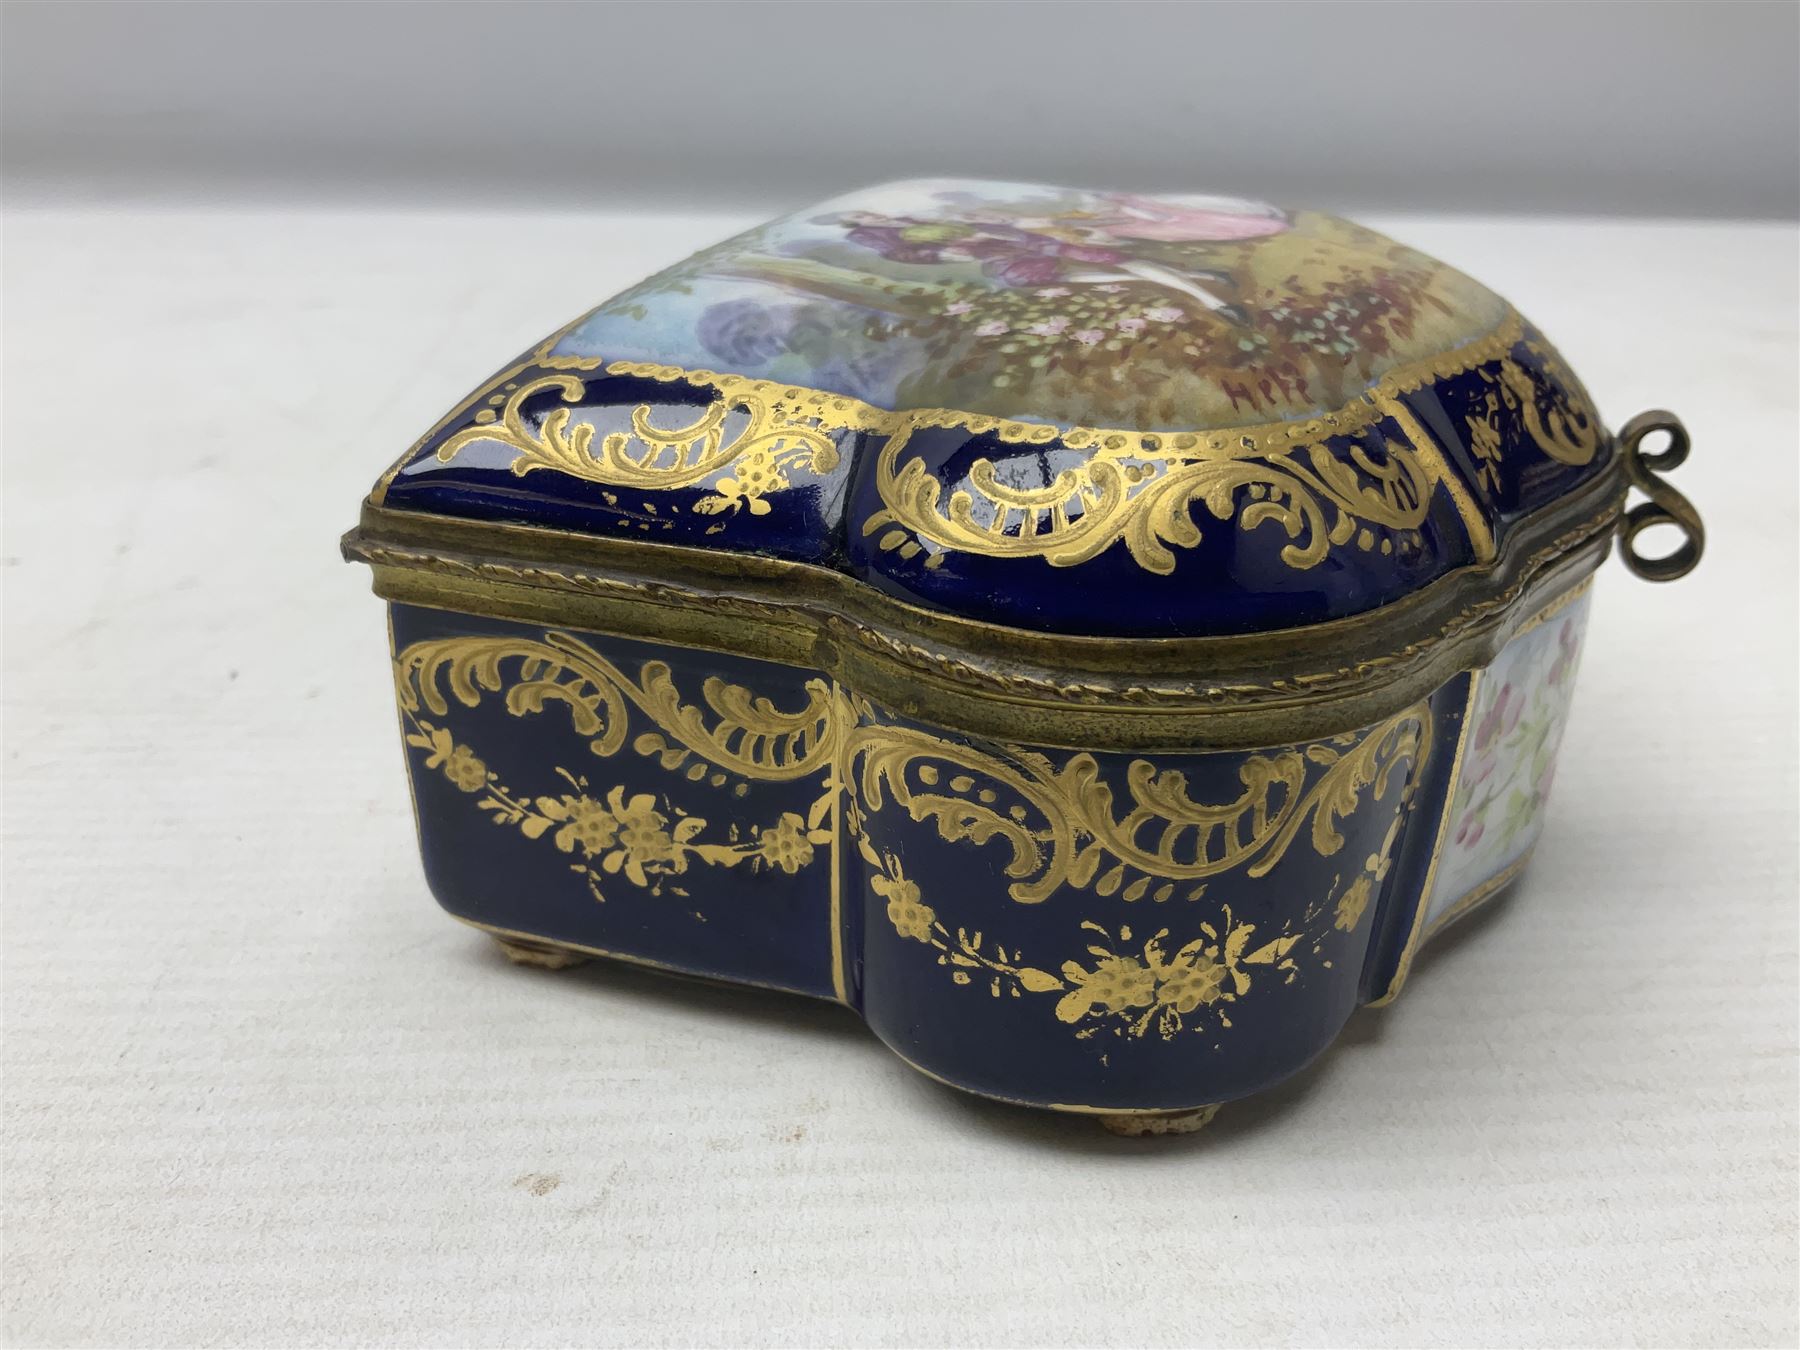 Sevres style late 19th/early 20th century trinket box decorated in the rococo style - Image 7 of 9